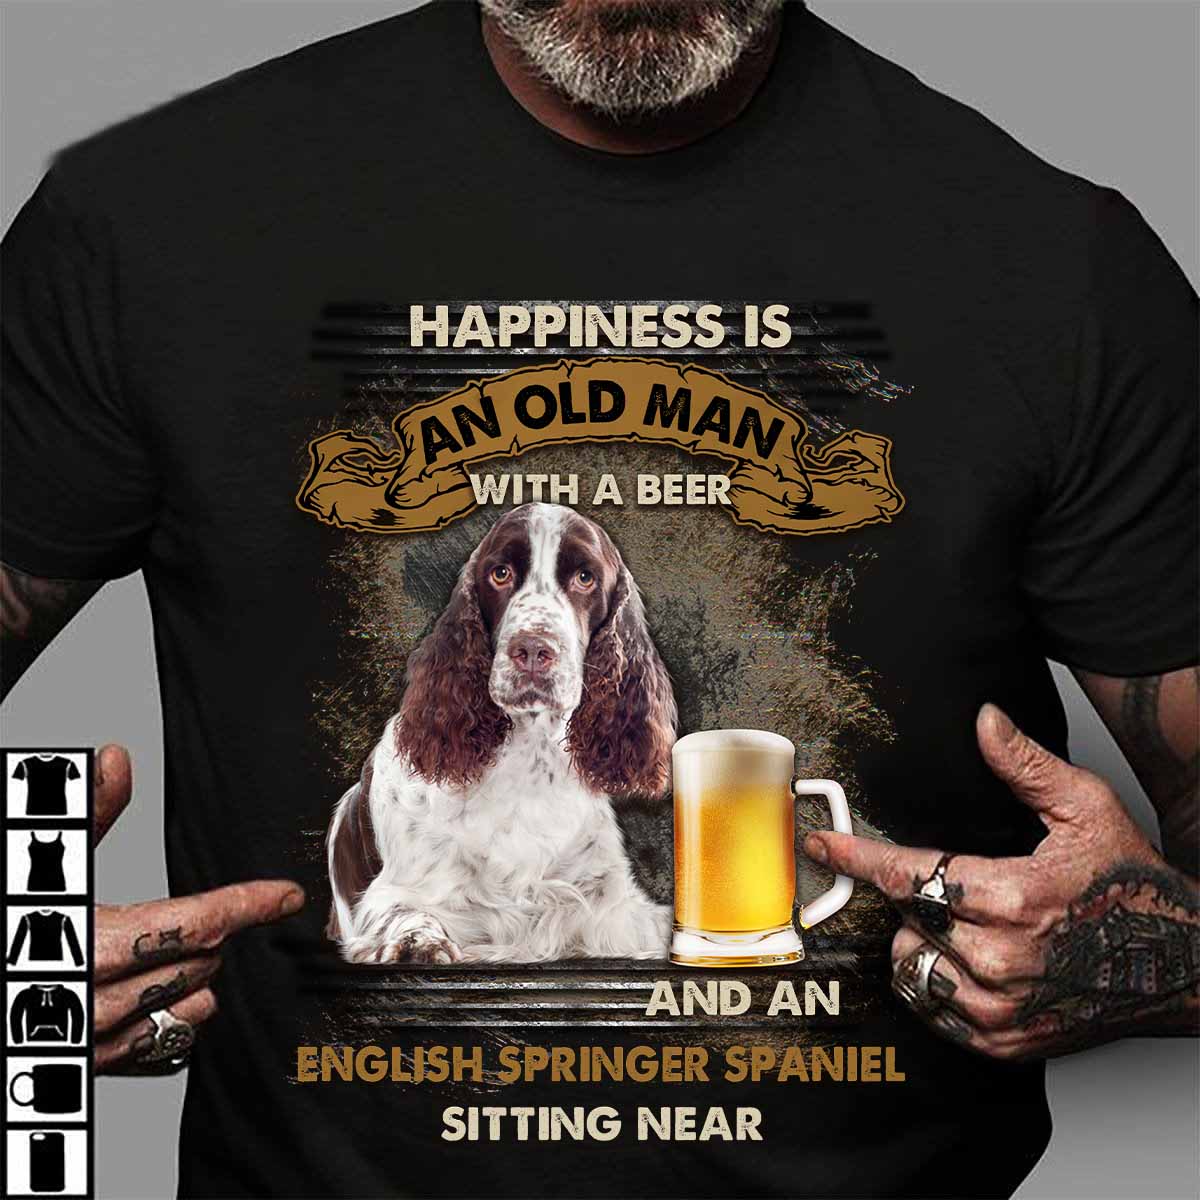 Happiness is an old man with a beer and an English springer spaniel sitting near - Beer lover